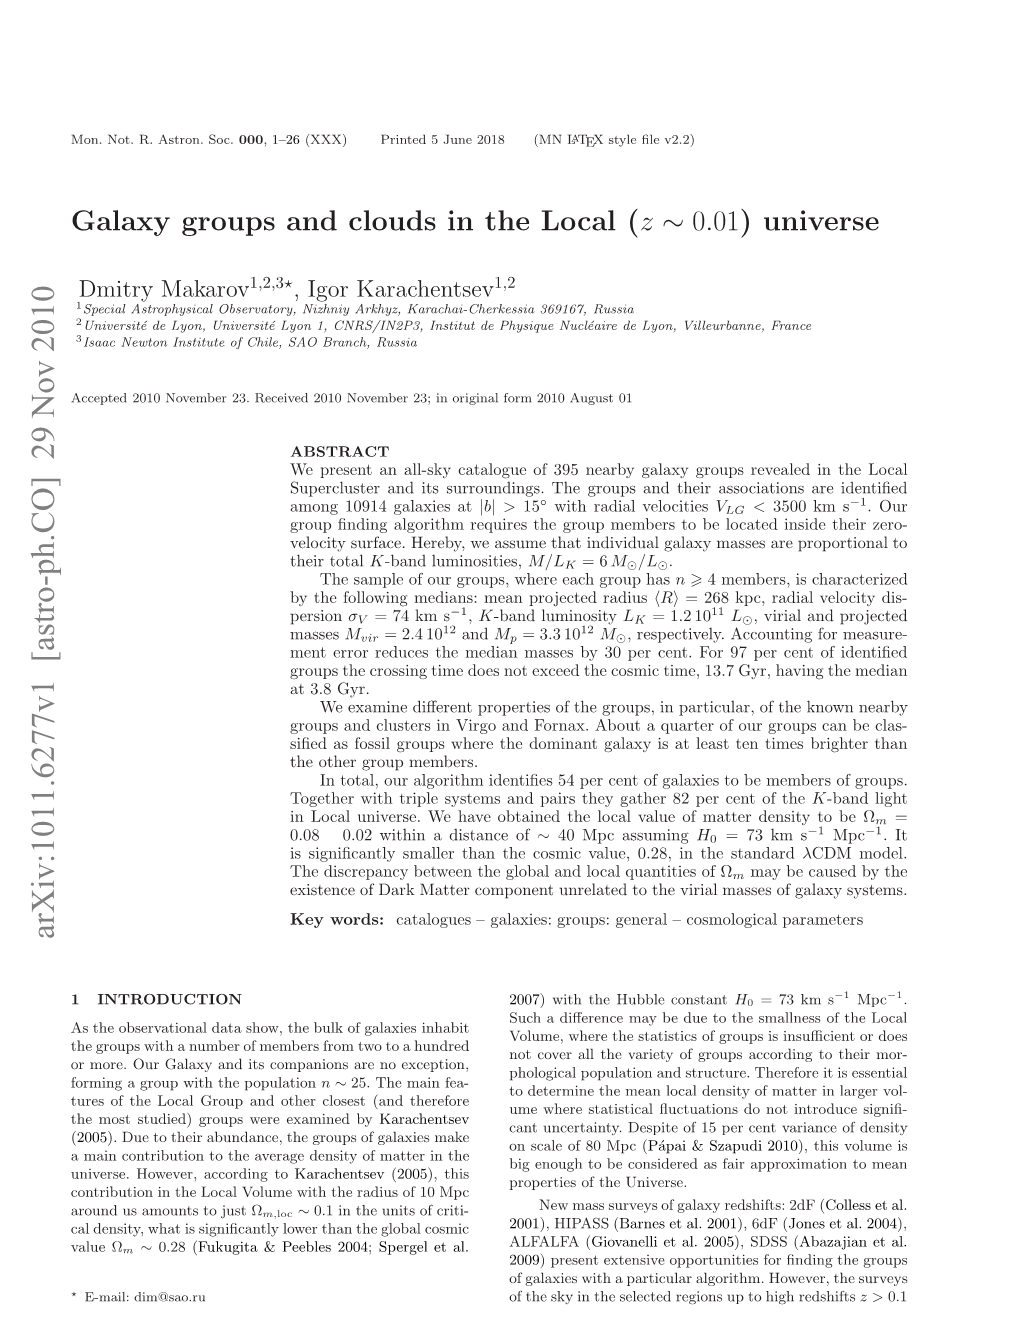 Galaxy Groups and Clouds in the Local (Z~ 0.01) Universe